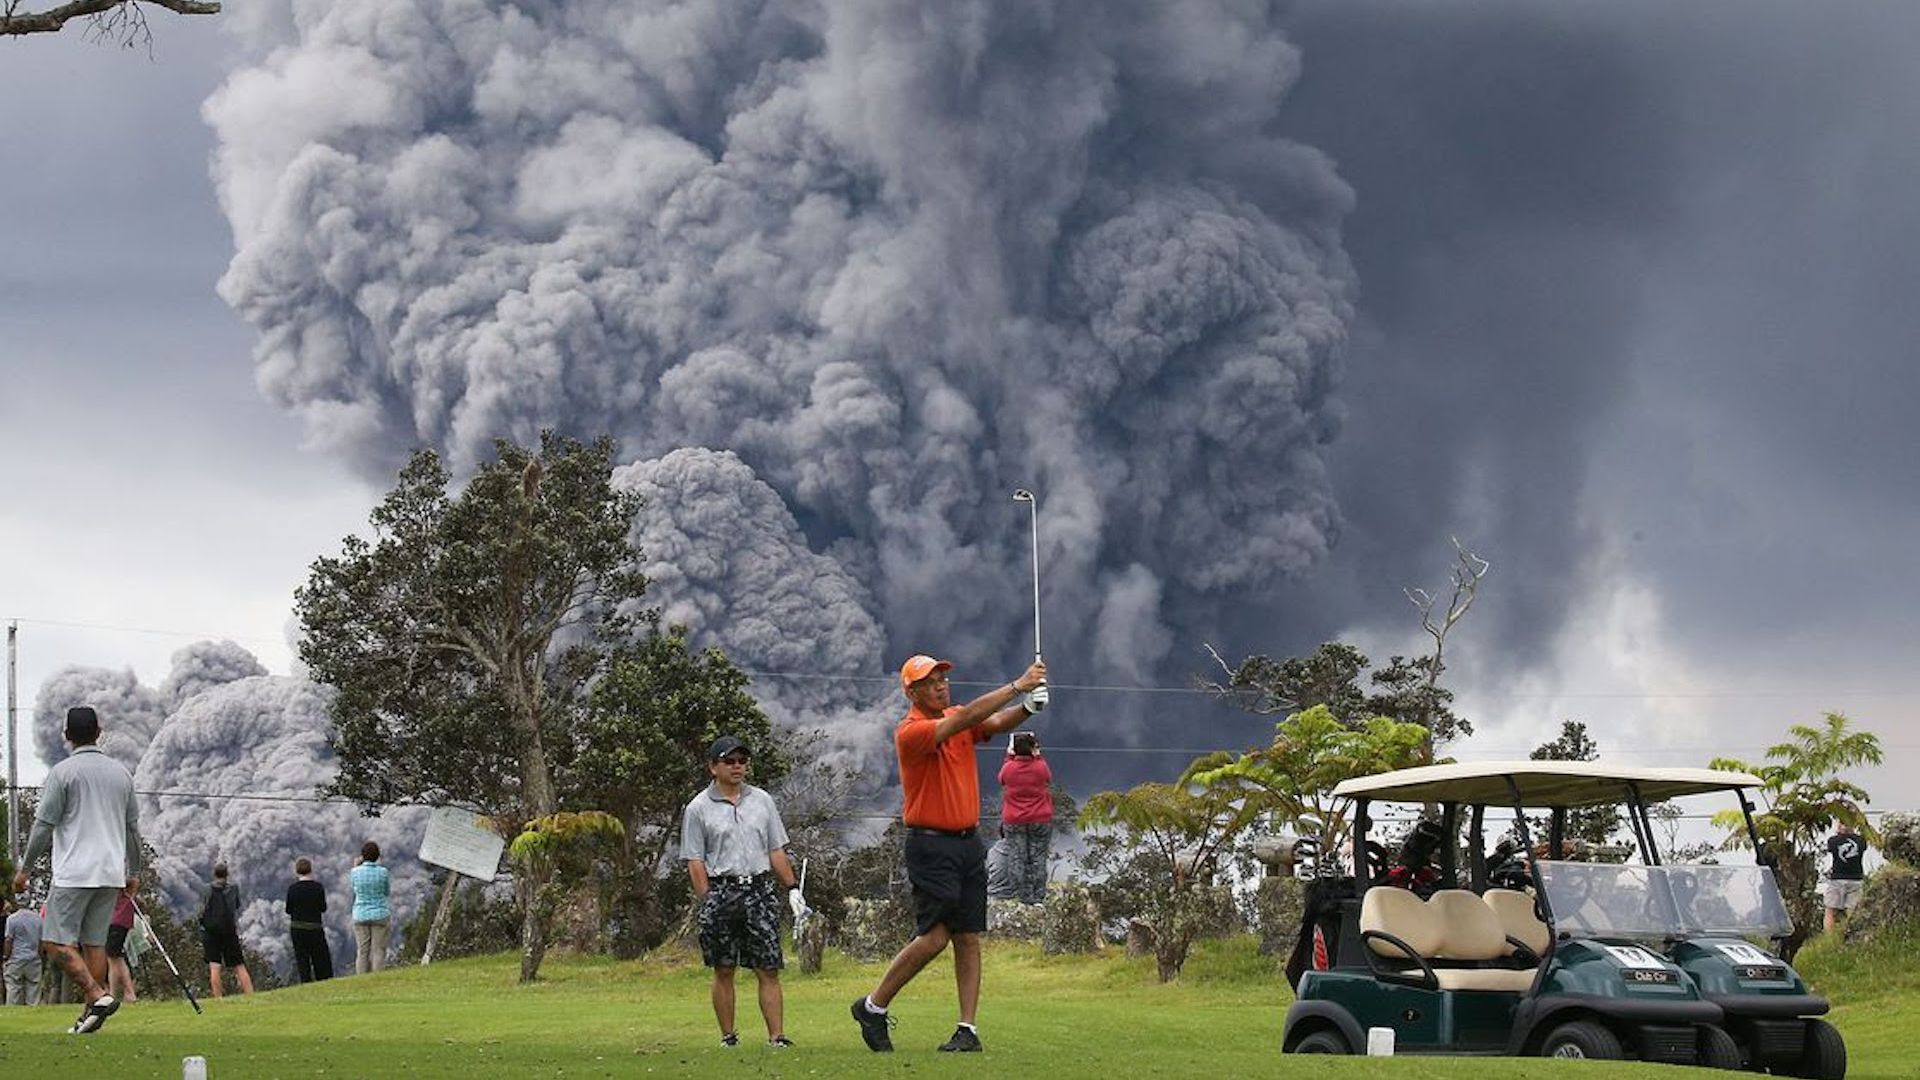 The Kilauea Volcano eruption looms behind a golfer in Hawaii Volcanoes National Park on May 15, 2018.